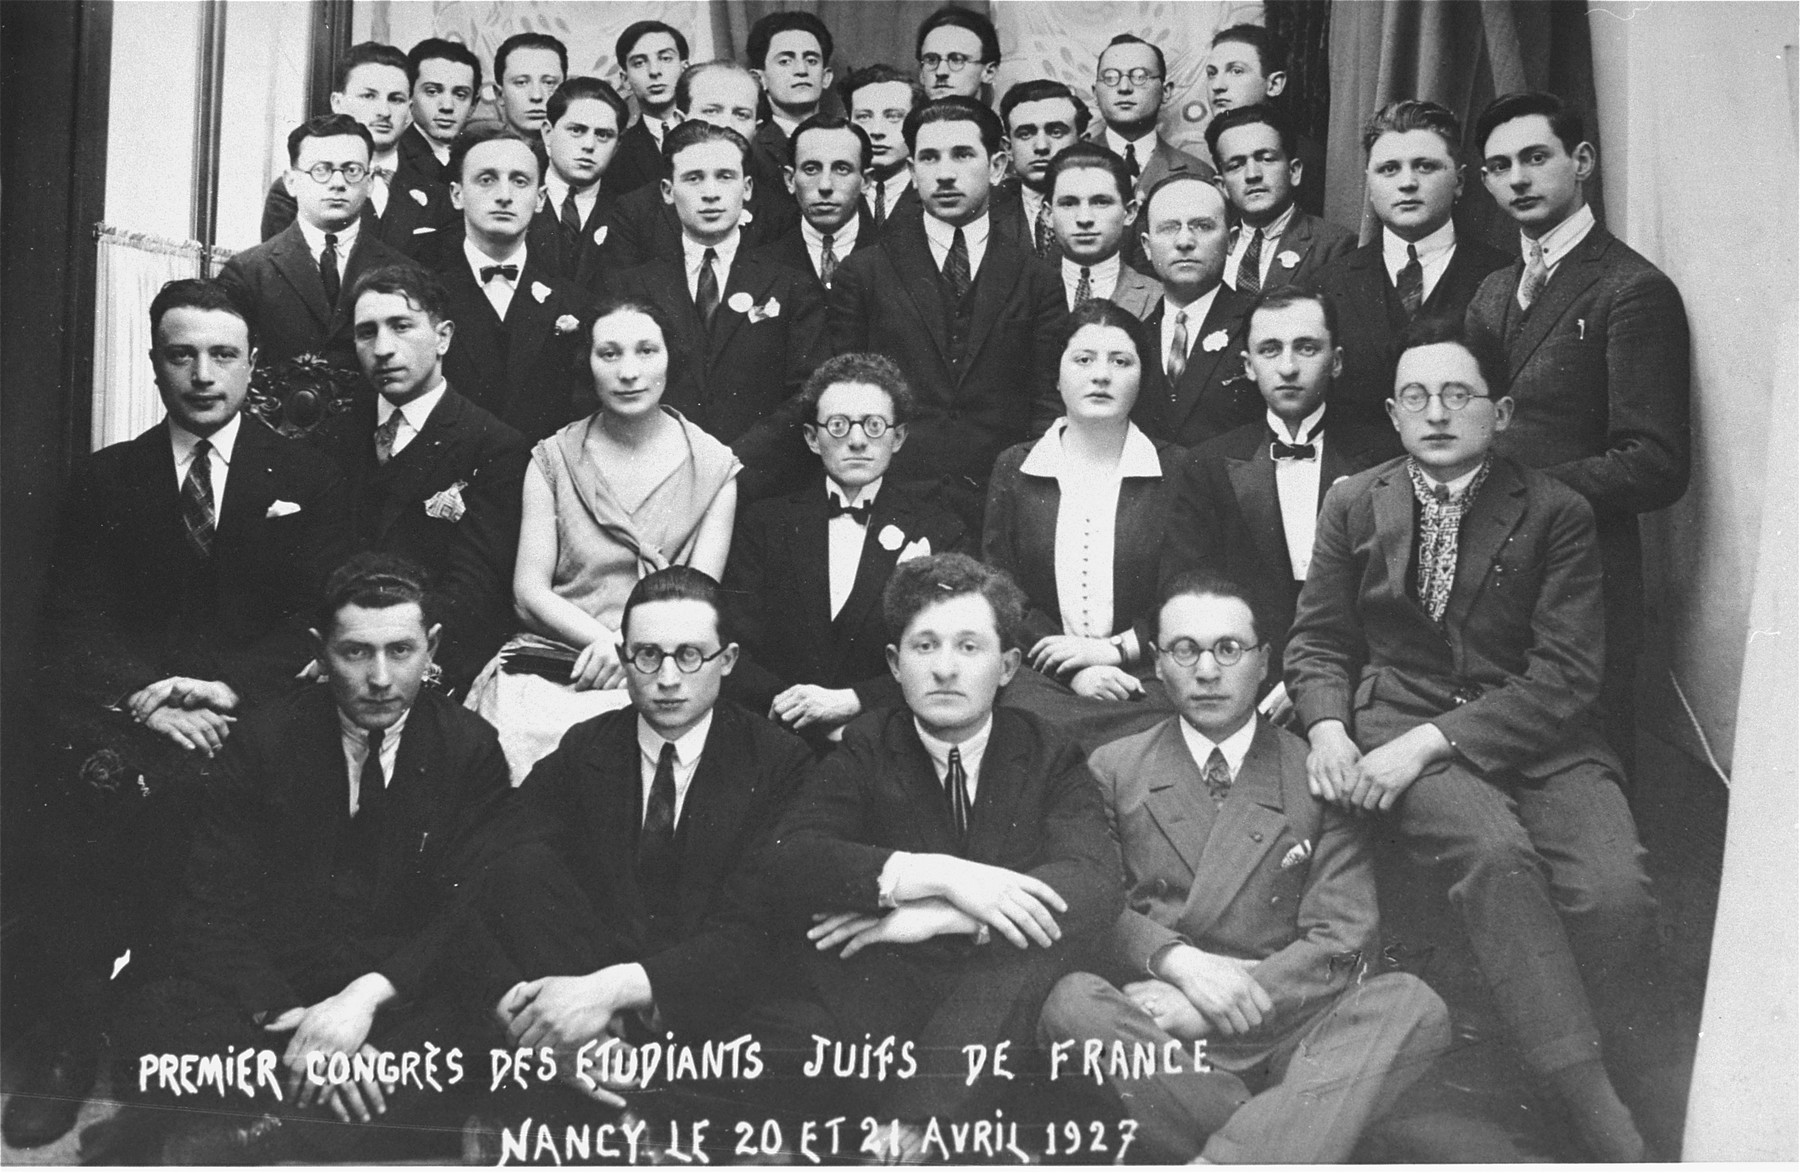 Group portrait of the participants of the First Congress of Jewish Students of France.  

Among those pictured is Alexander Markon, the donor's father (second from the left in the front row).